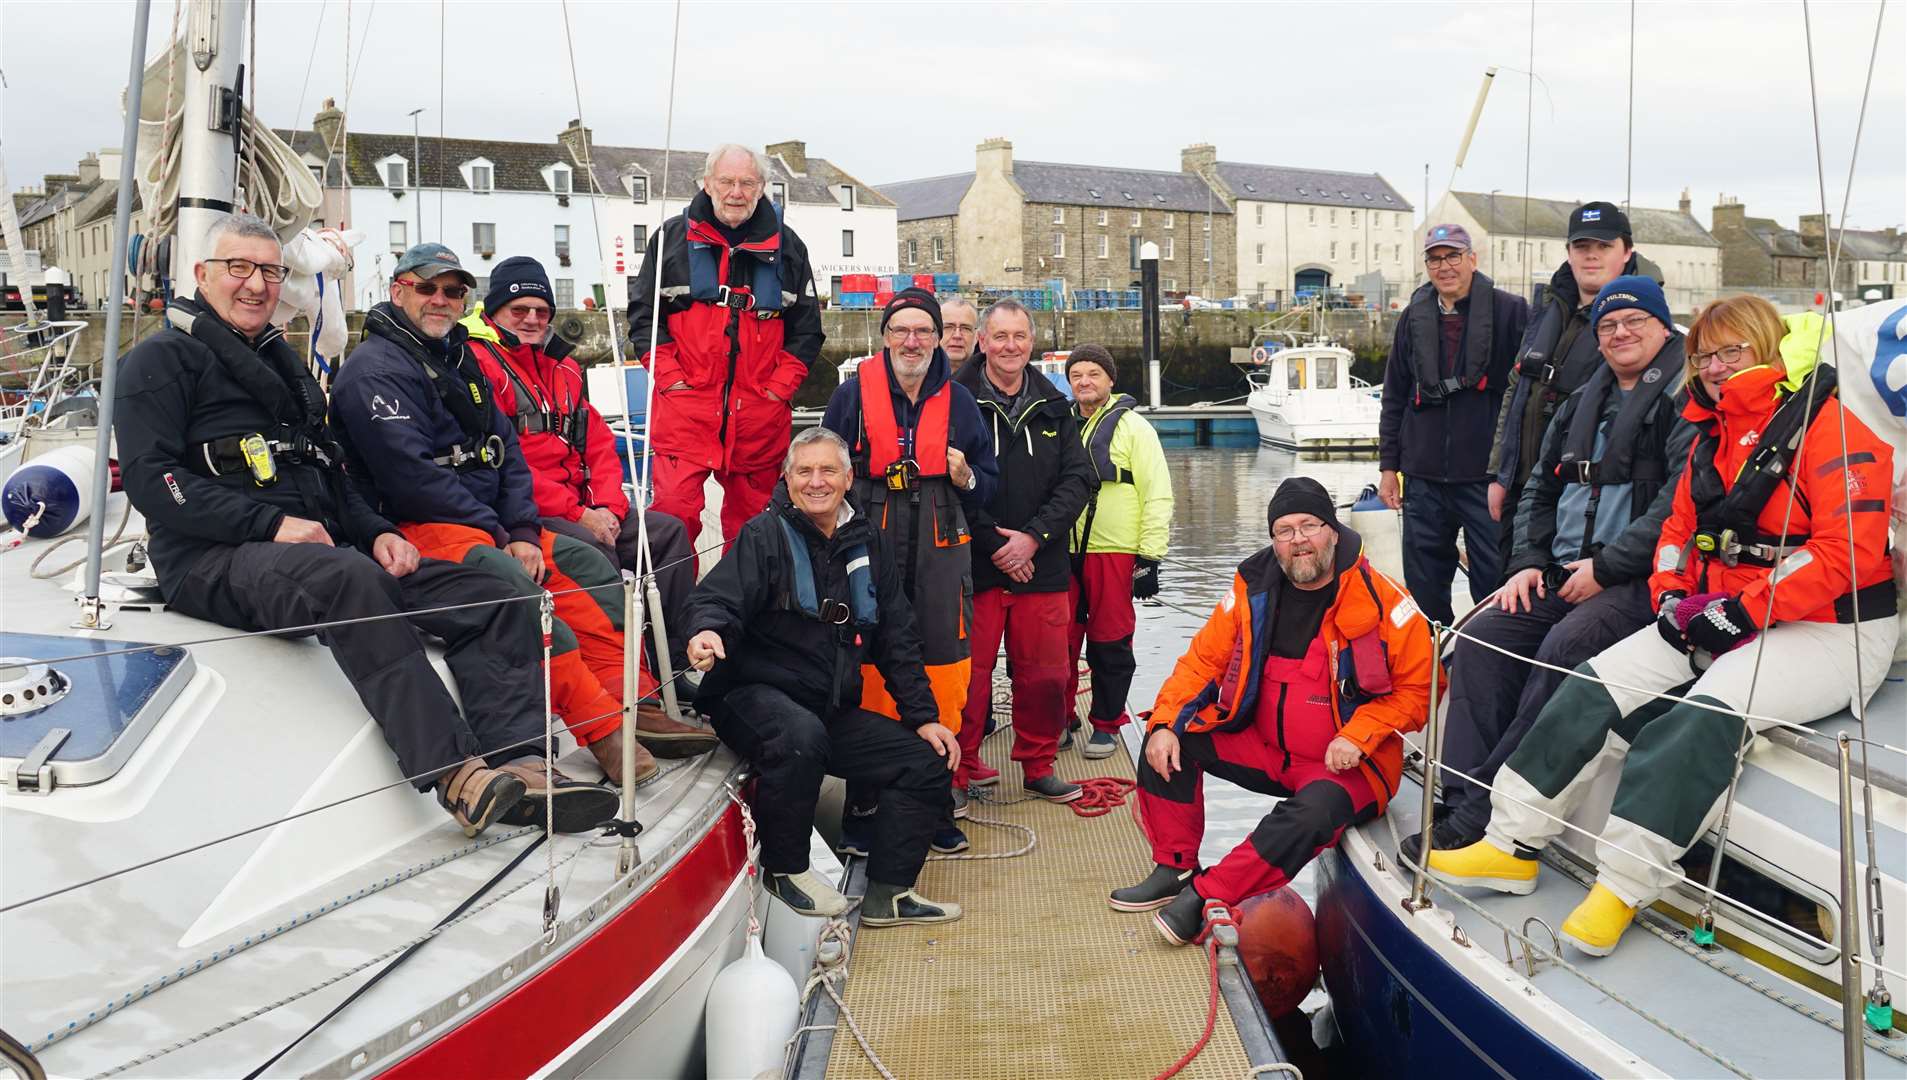 Some of the yacht enthusiasts gather at the marina in Wick harbour before setting sail on a timed exercise from Wick Bay to Sinclair's Bay and back. Picture: DGS